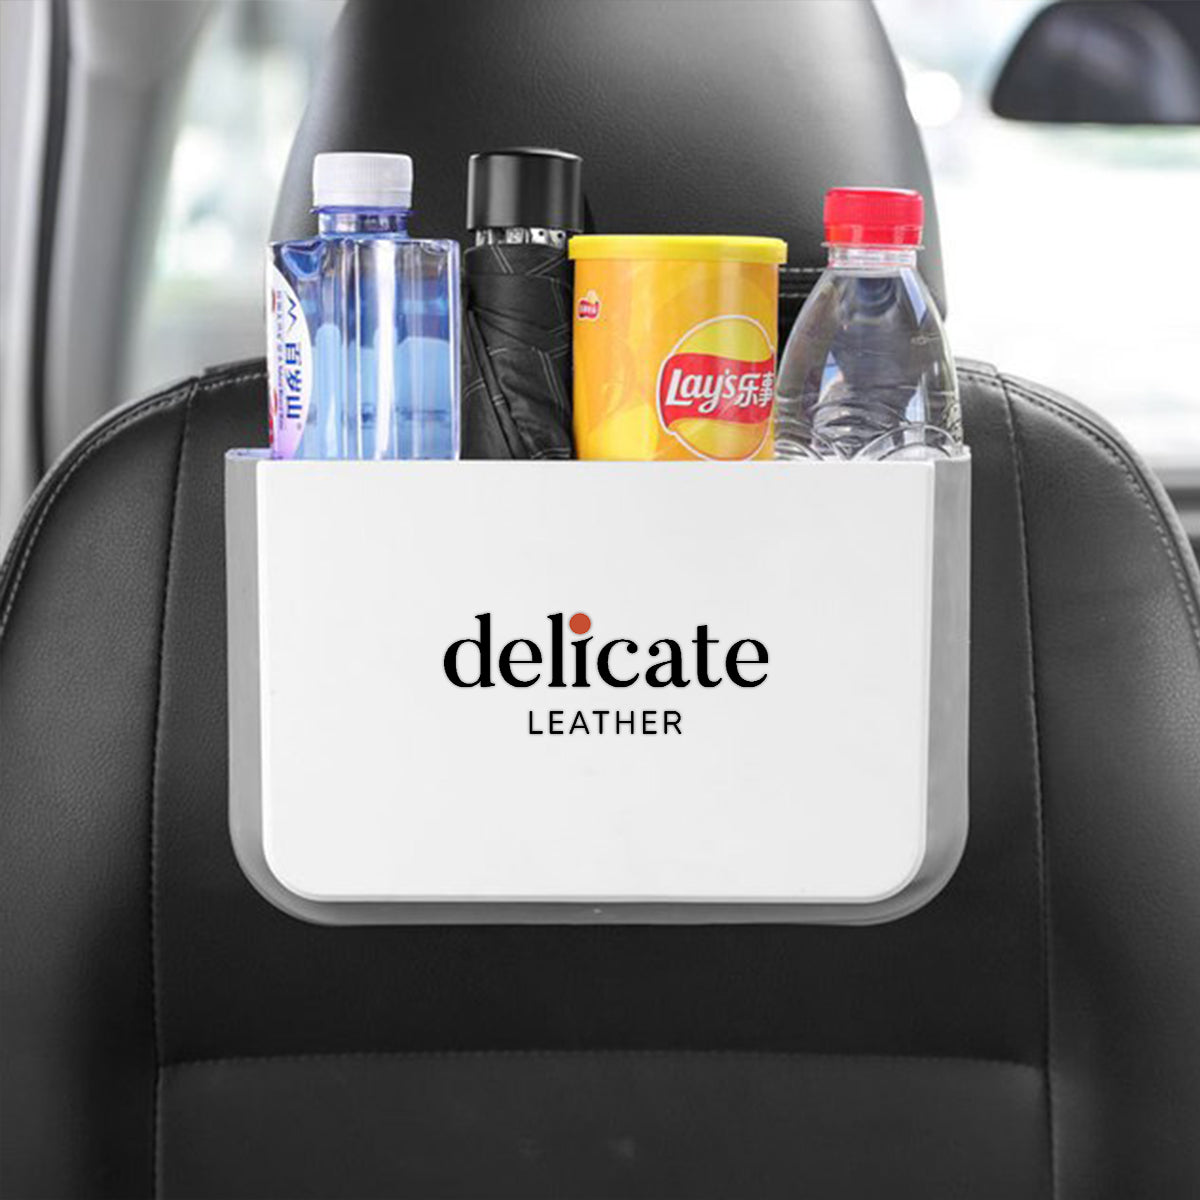 Hanging Waterproof Car Trash can-Foldable, Custom For Your Cars, Waterproof, and Equipped with Cup Holders and Trays. Multi-Purpose, Car Accessories LR11992 - Delicate Leather